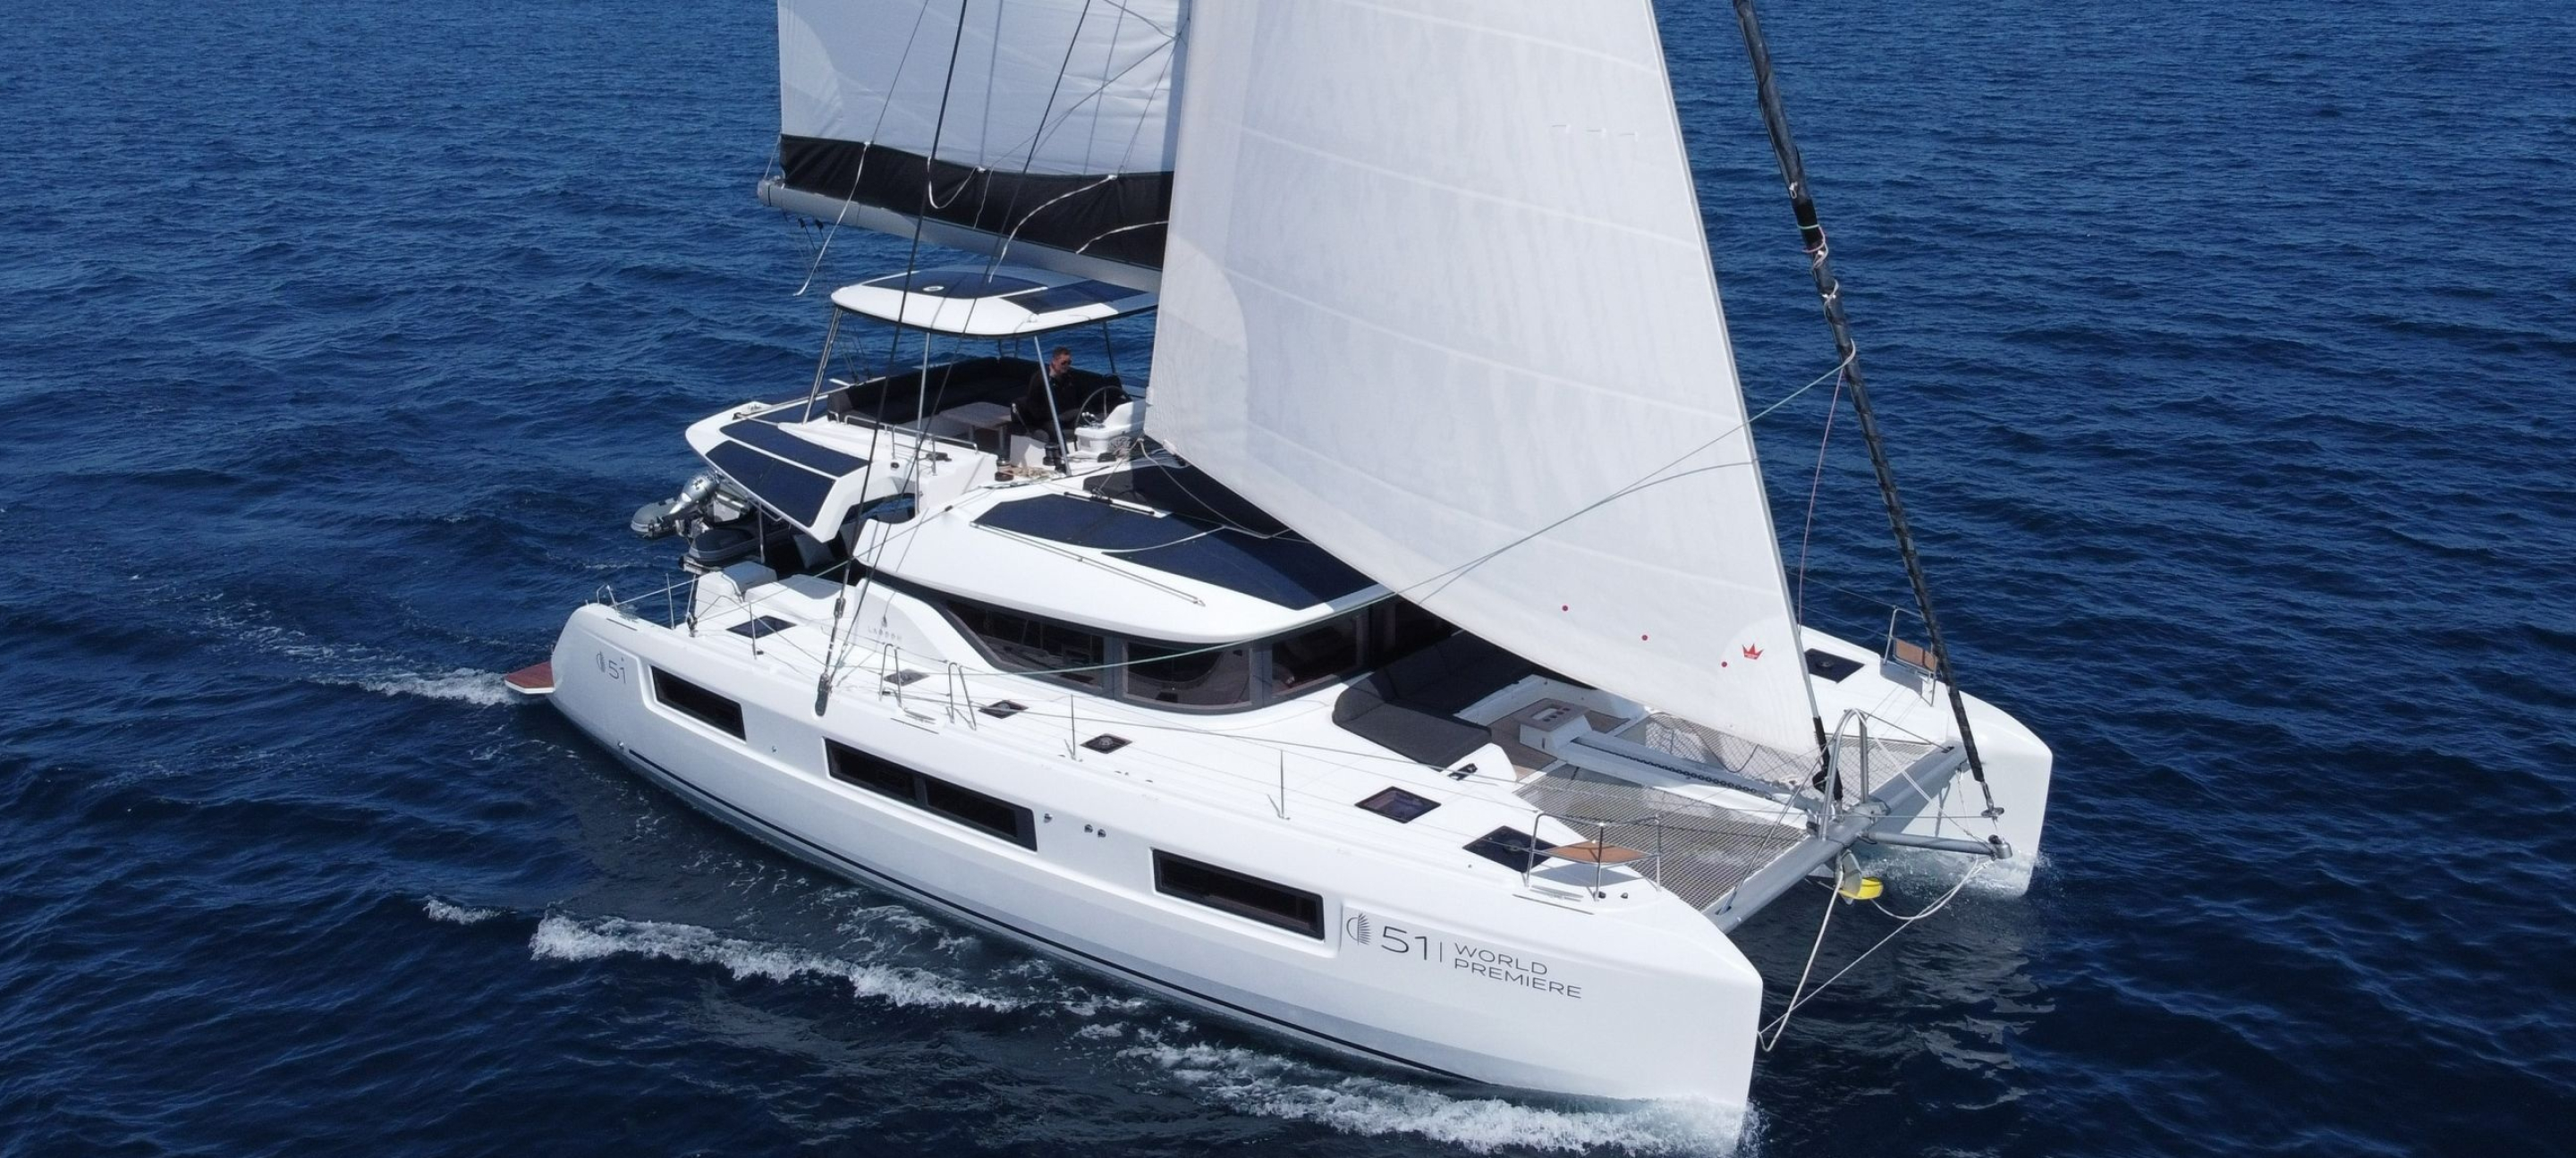 Catamaran: Lagoon 51, An optimized flybridge with separate sunbathing and dining areas. 2880x1300 Dual Screen Background.